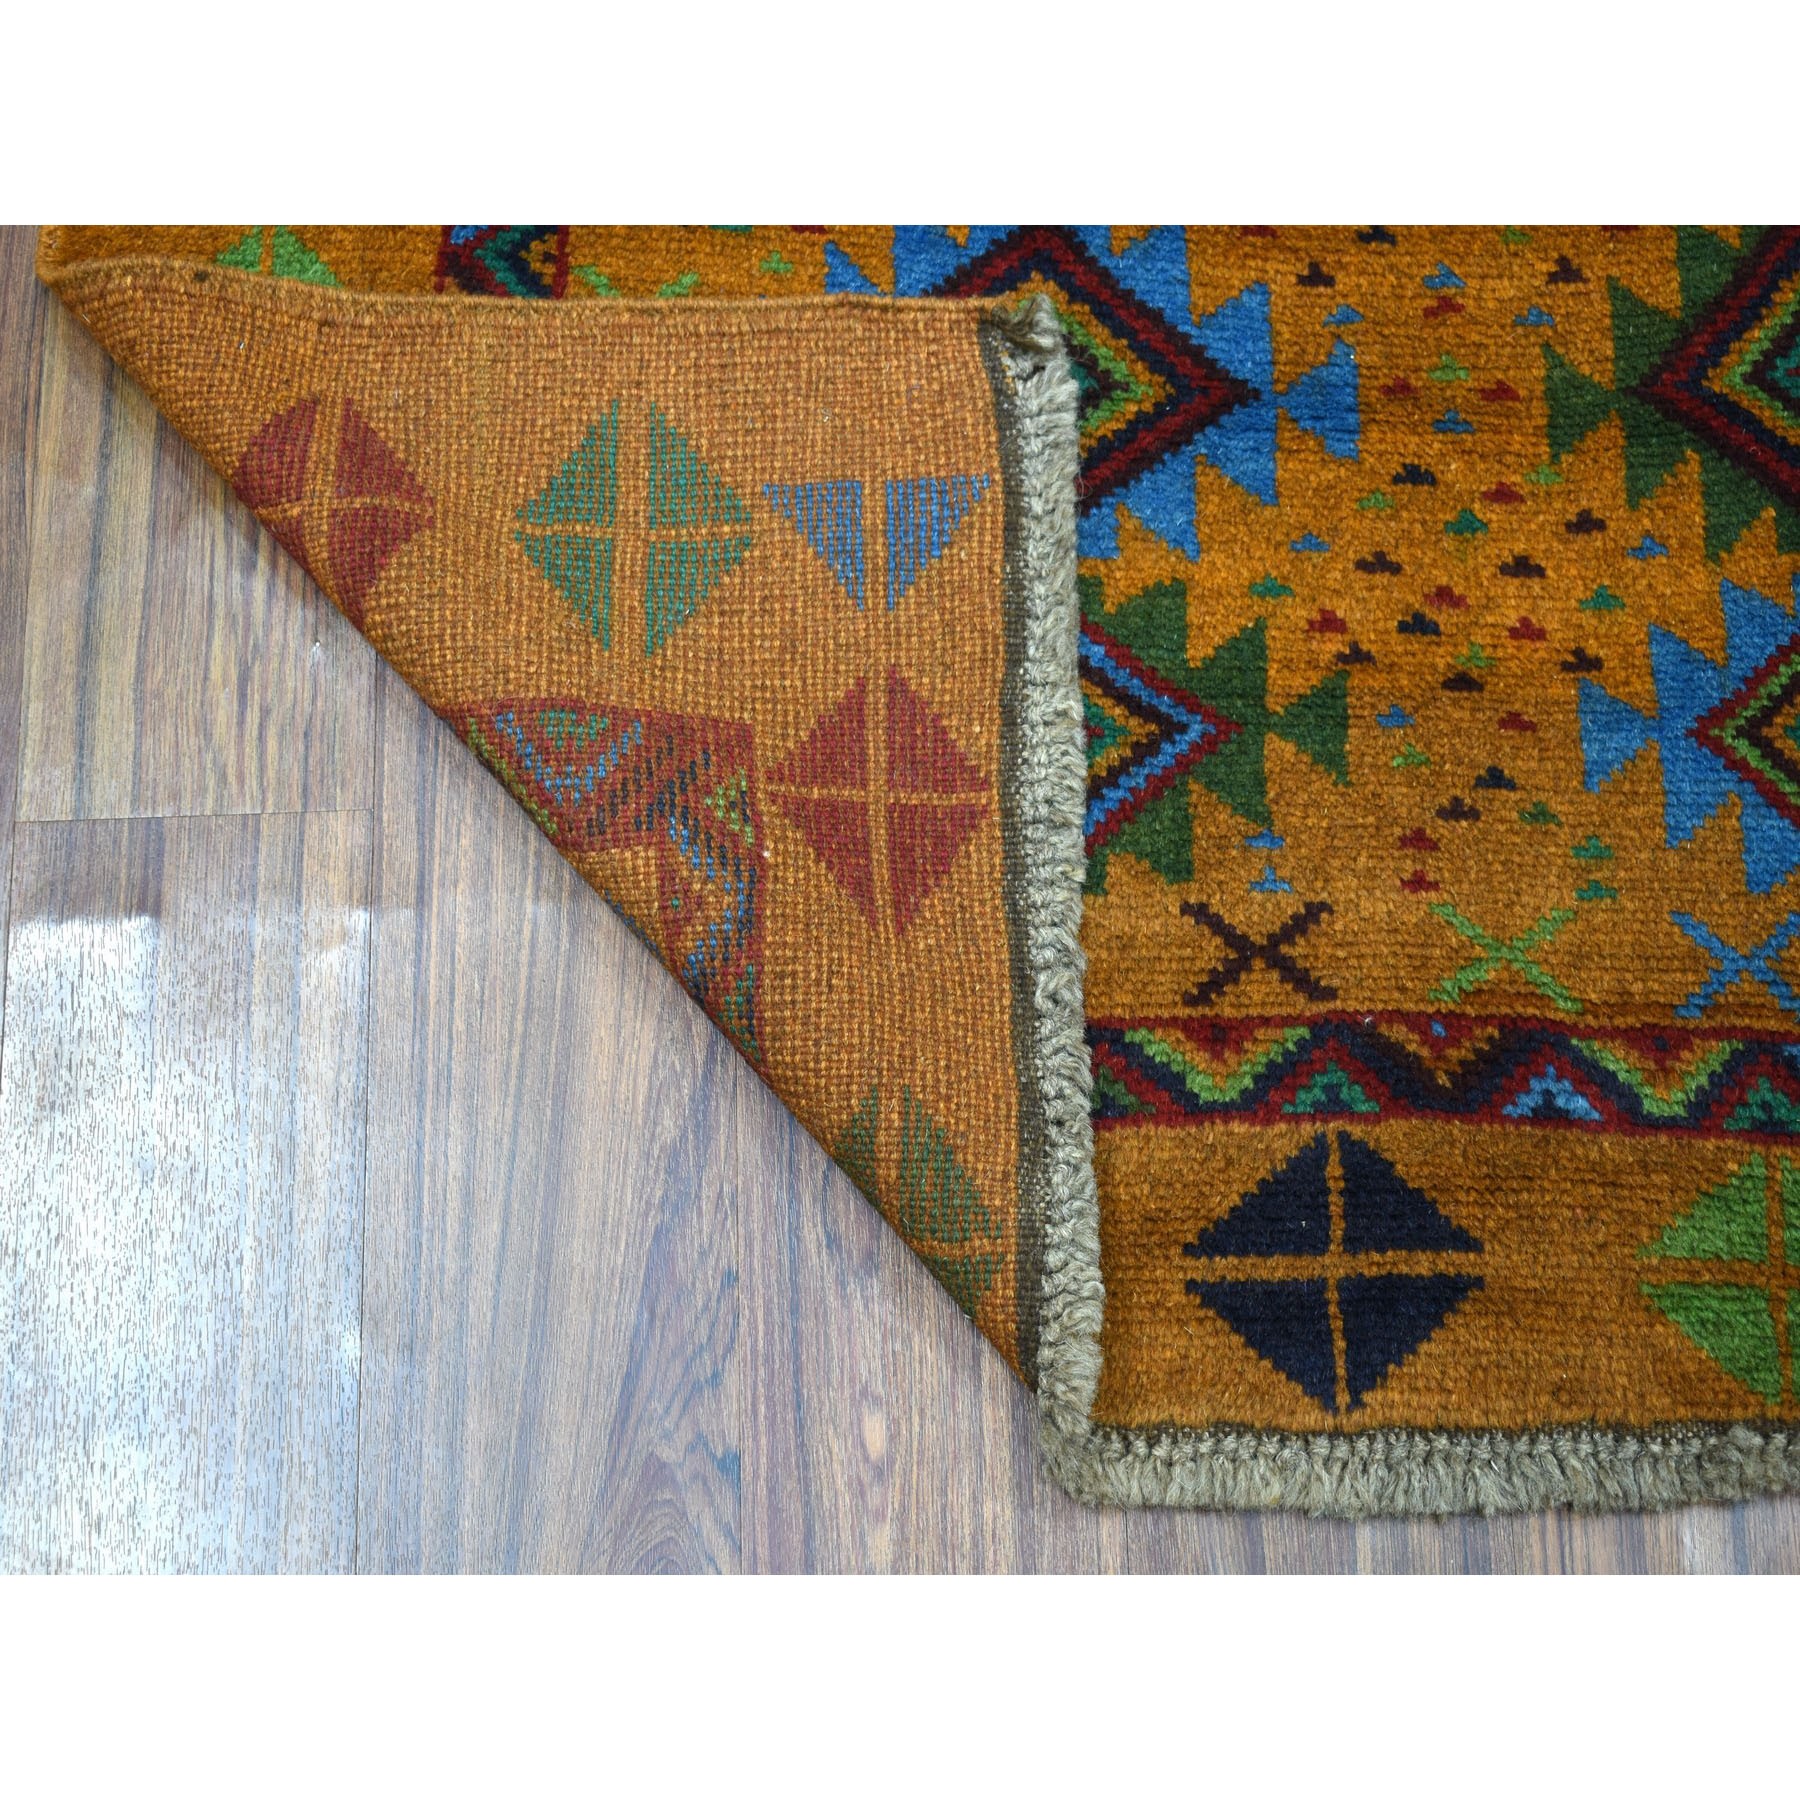 4'x6'1" Natural Dyes Colorful Afghan Baluch Geometric Design Hand Woven Pure Wool Oriental Rug 